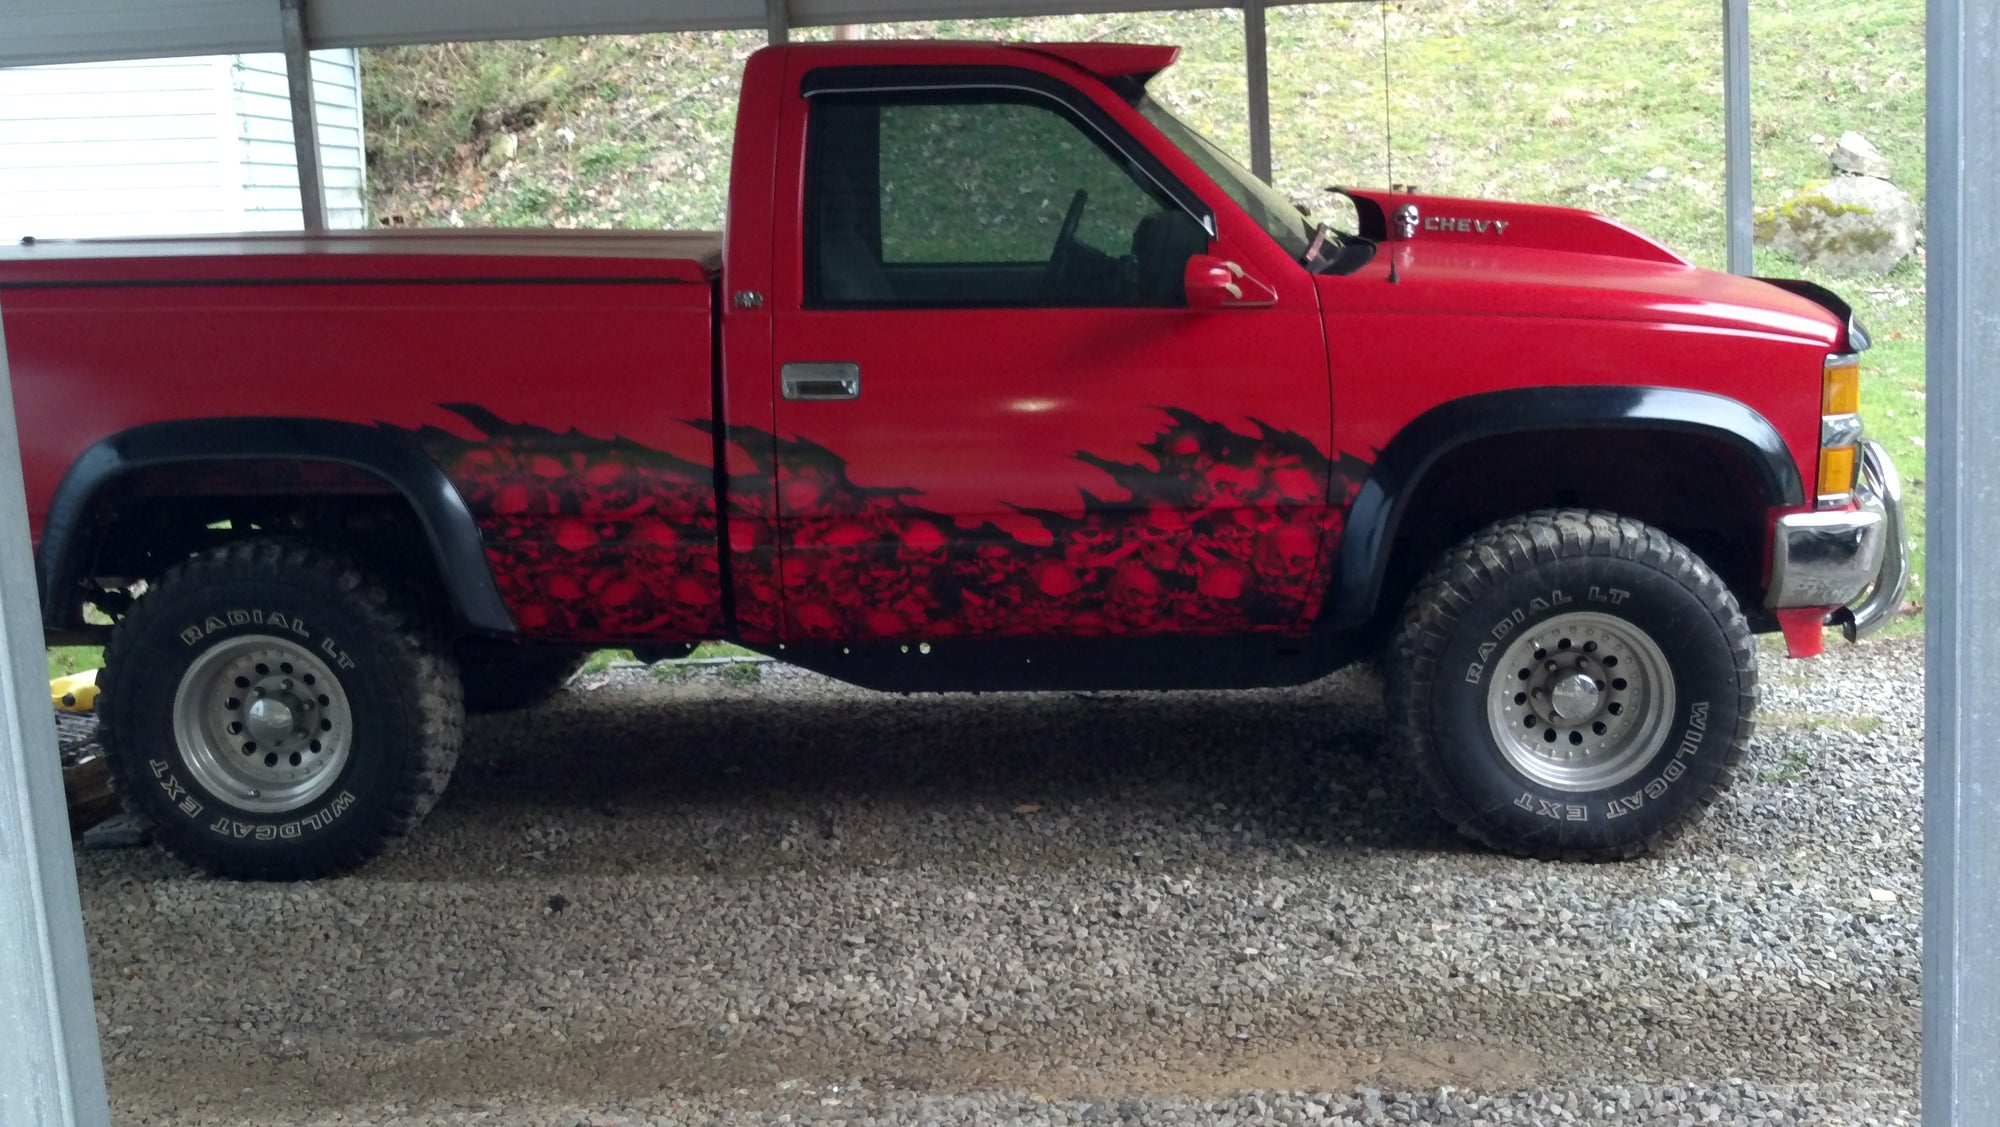 skull wave decal wrap on red chevy truck